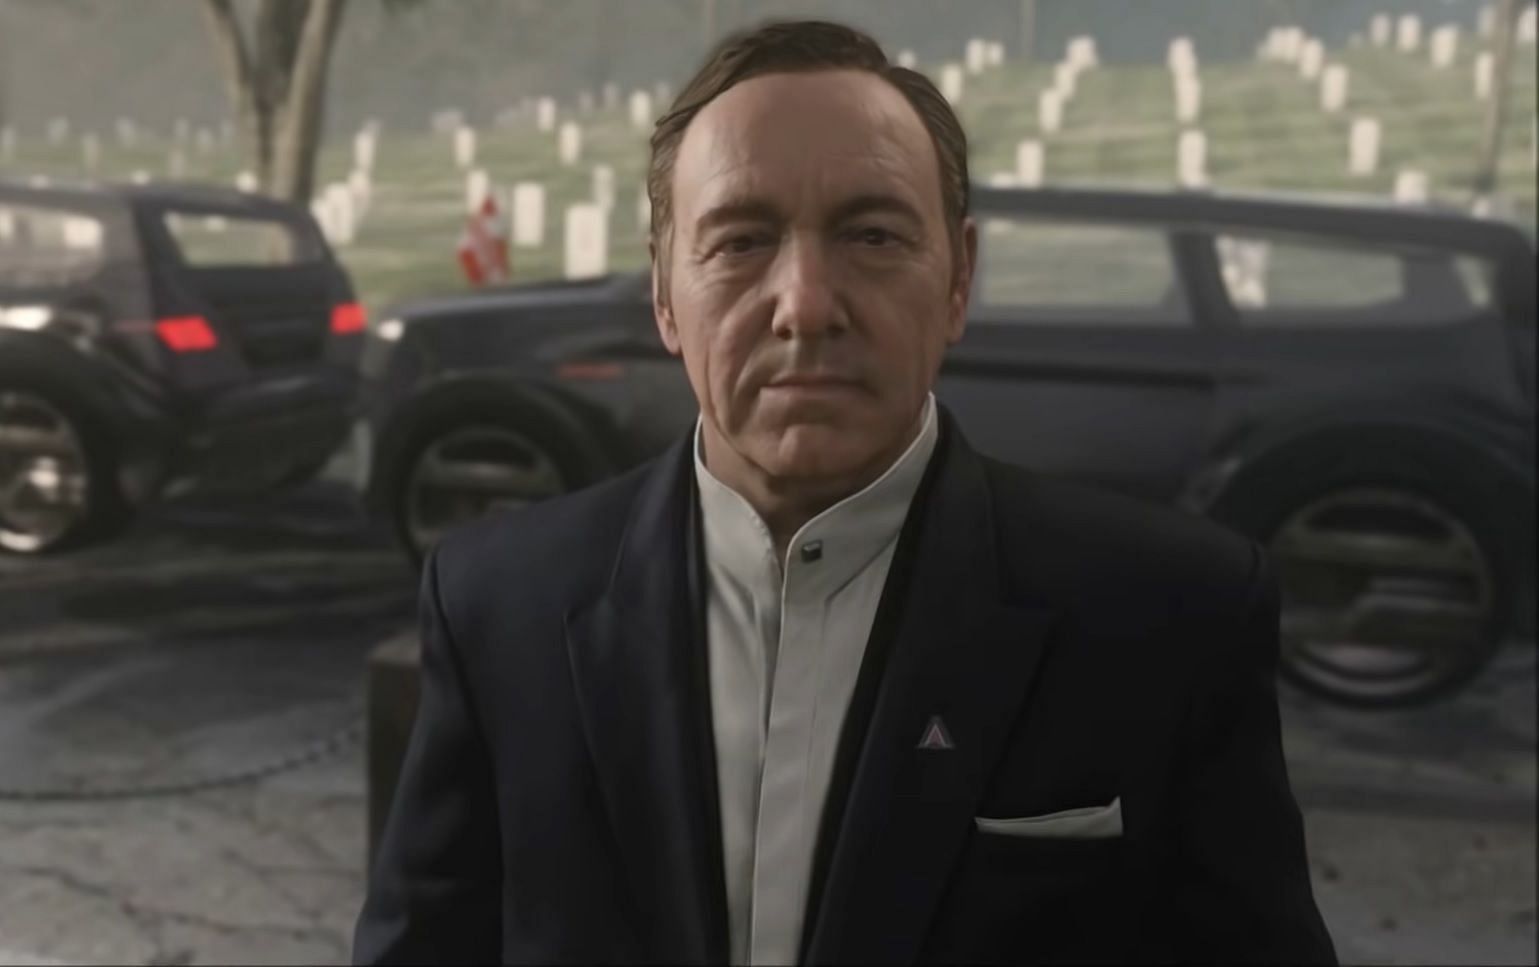 Who is the famous actor in Call of Duty: Advanced Warfare?